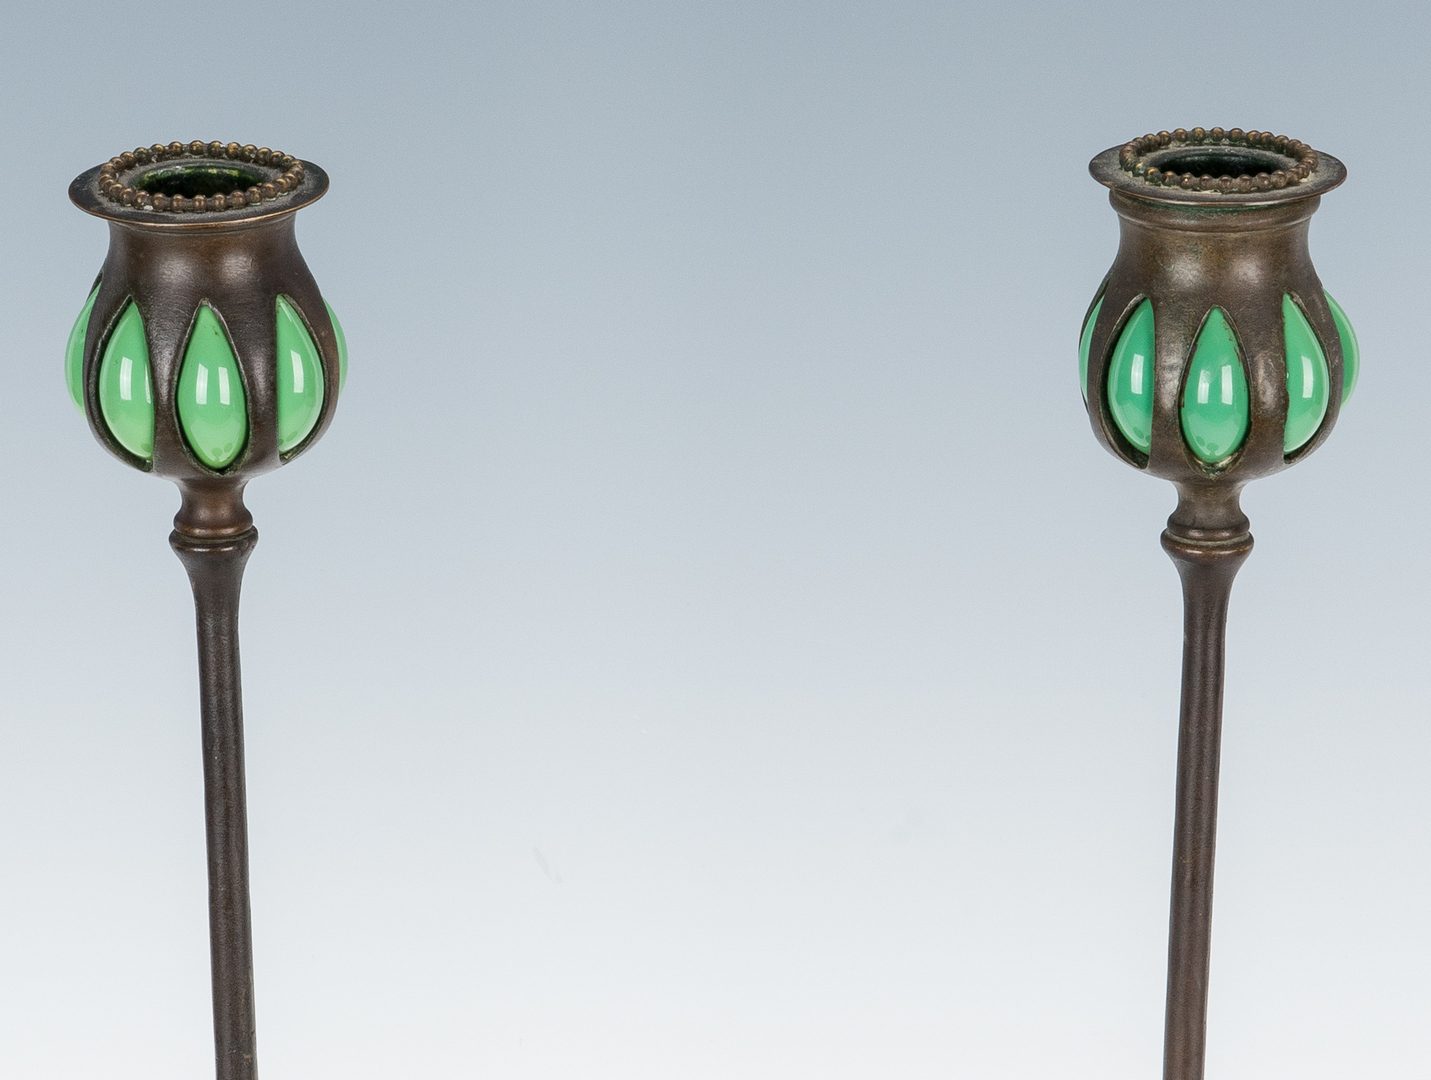 Lot 508: Pair of Tiffany Studios Bronze & Glass "Puddle" Candlesticks